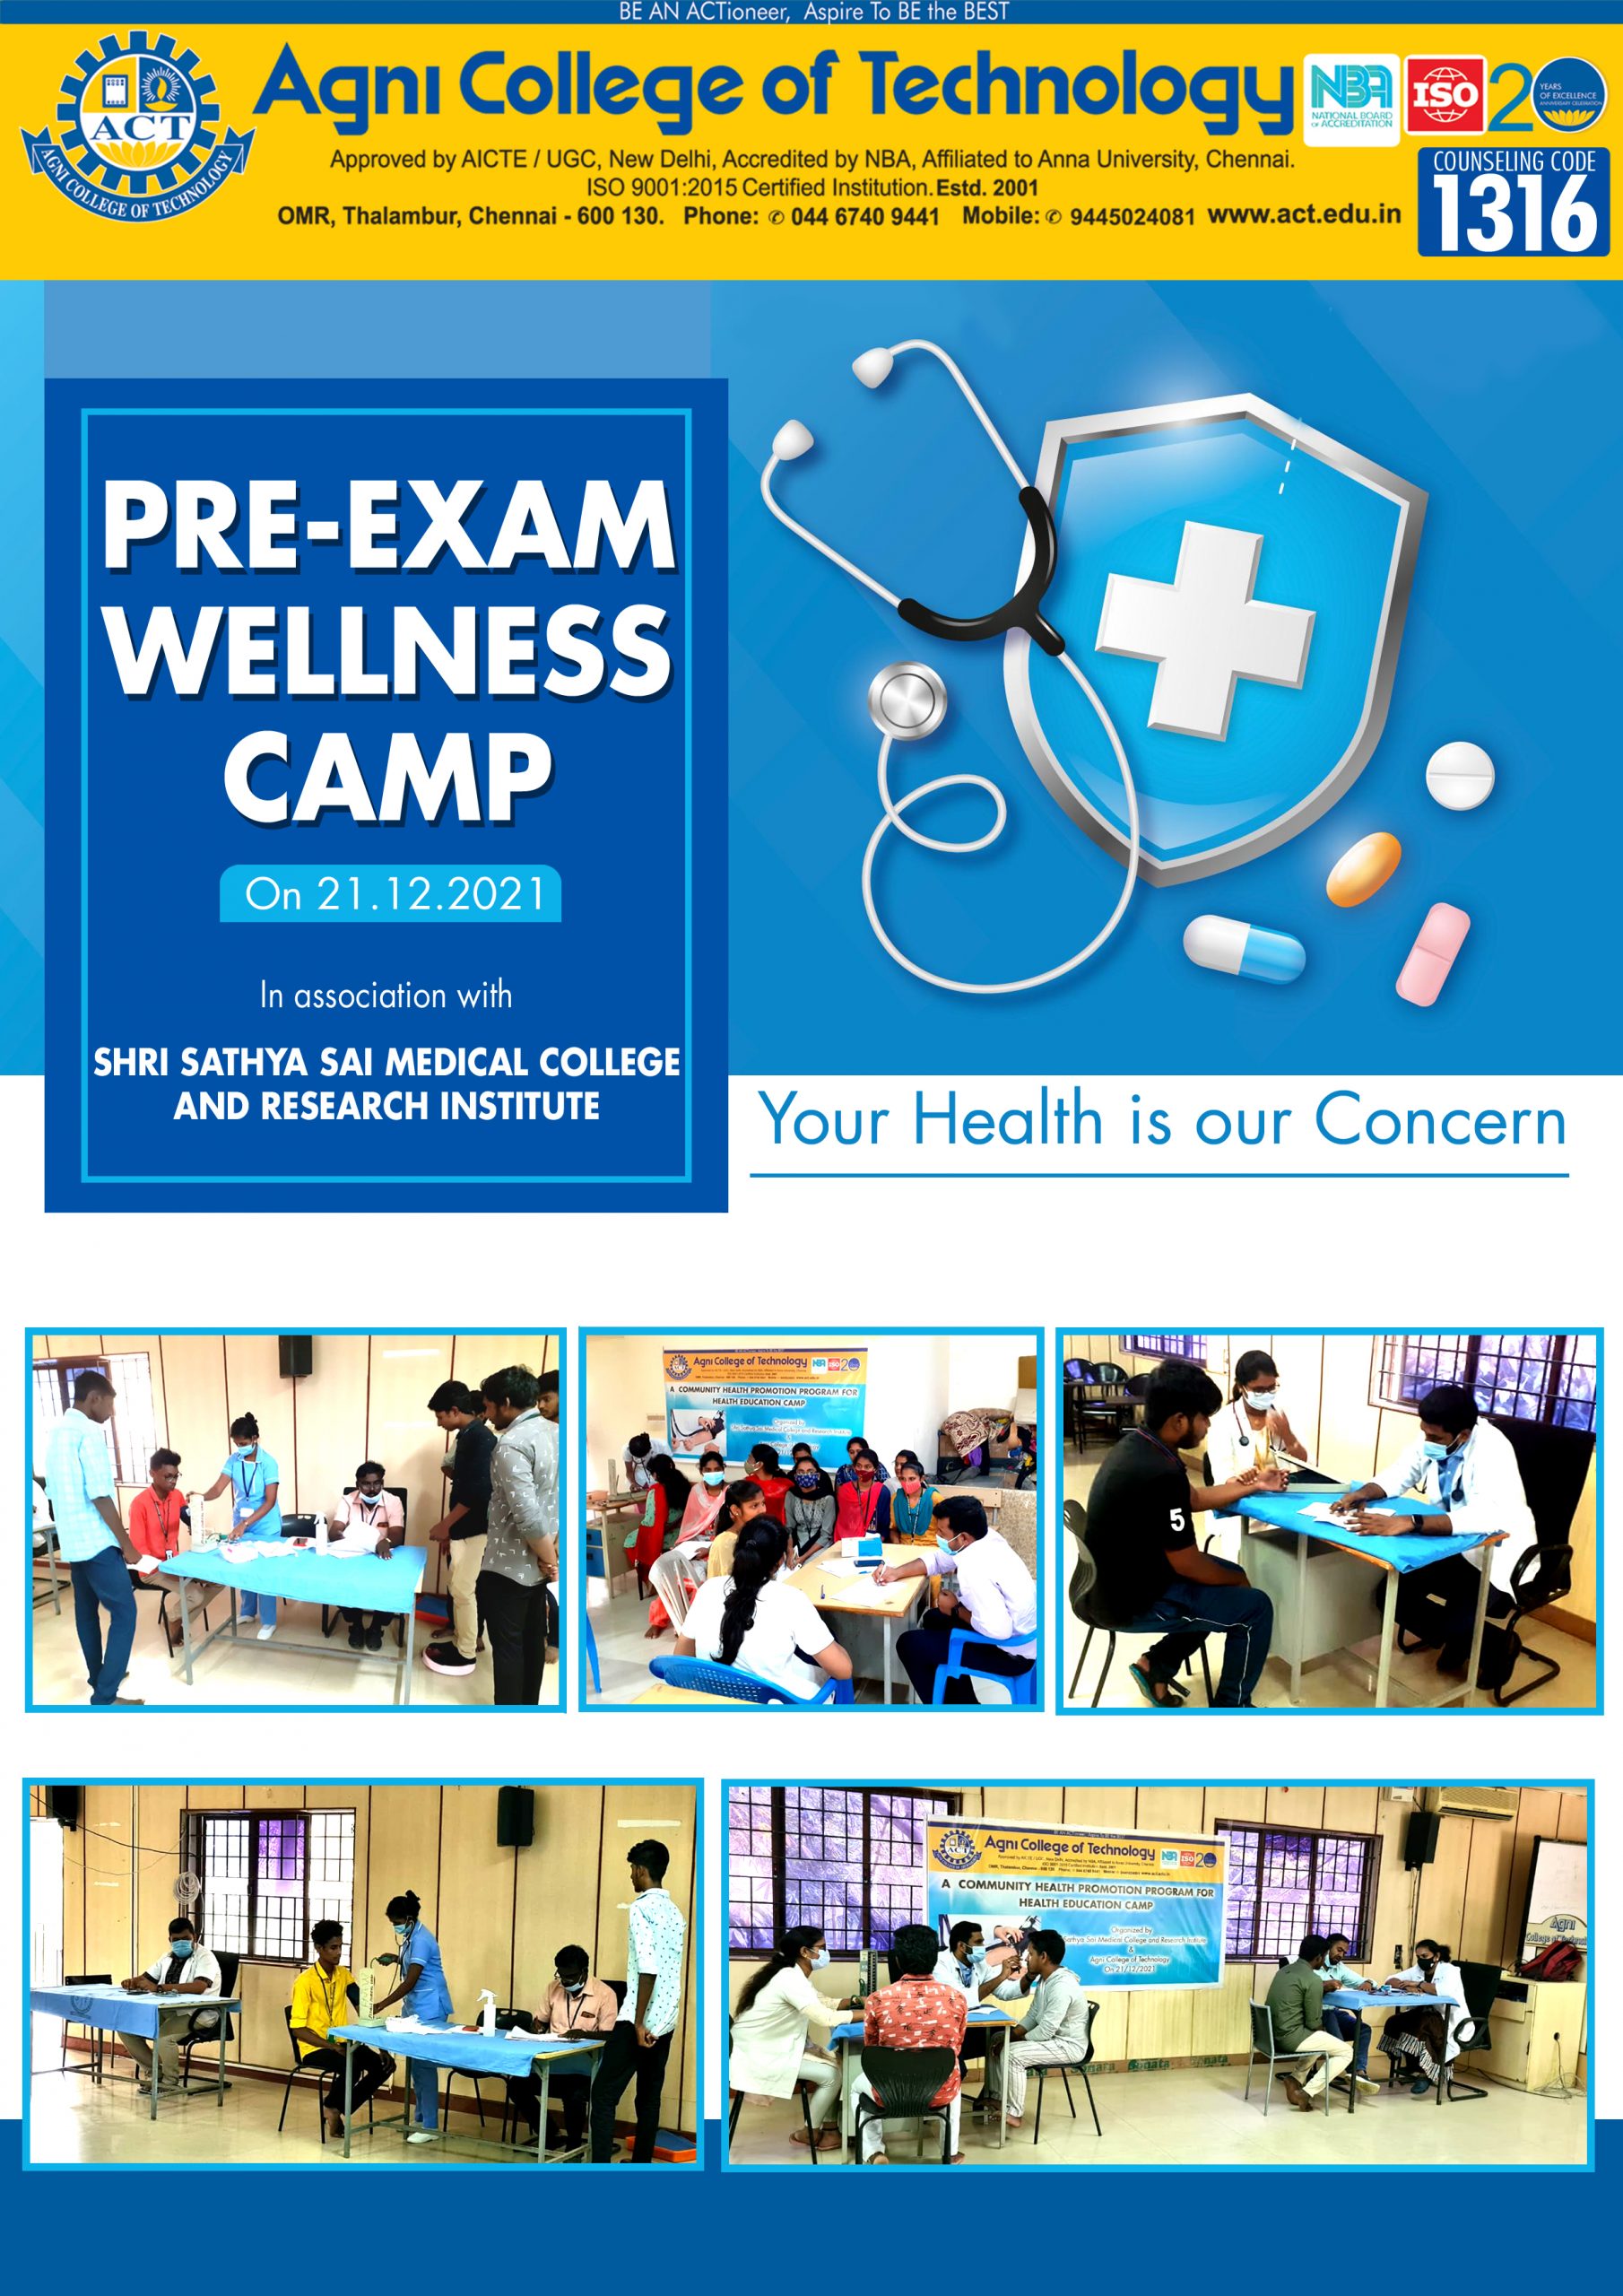 MEDICAL CAMP for ACT Students